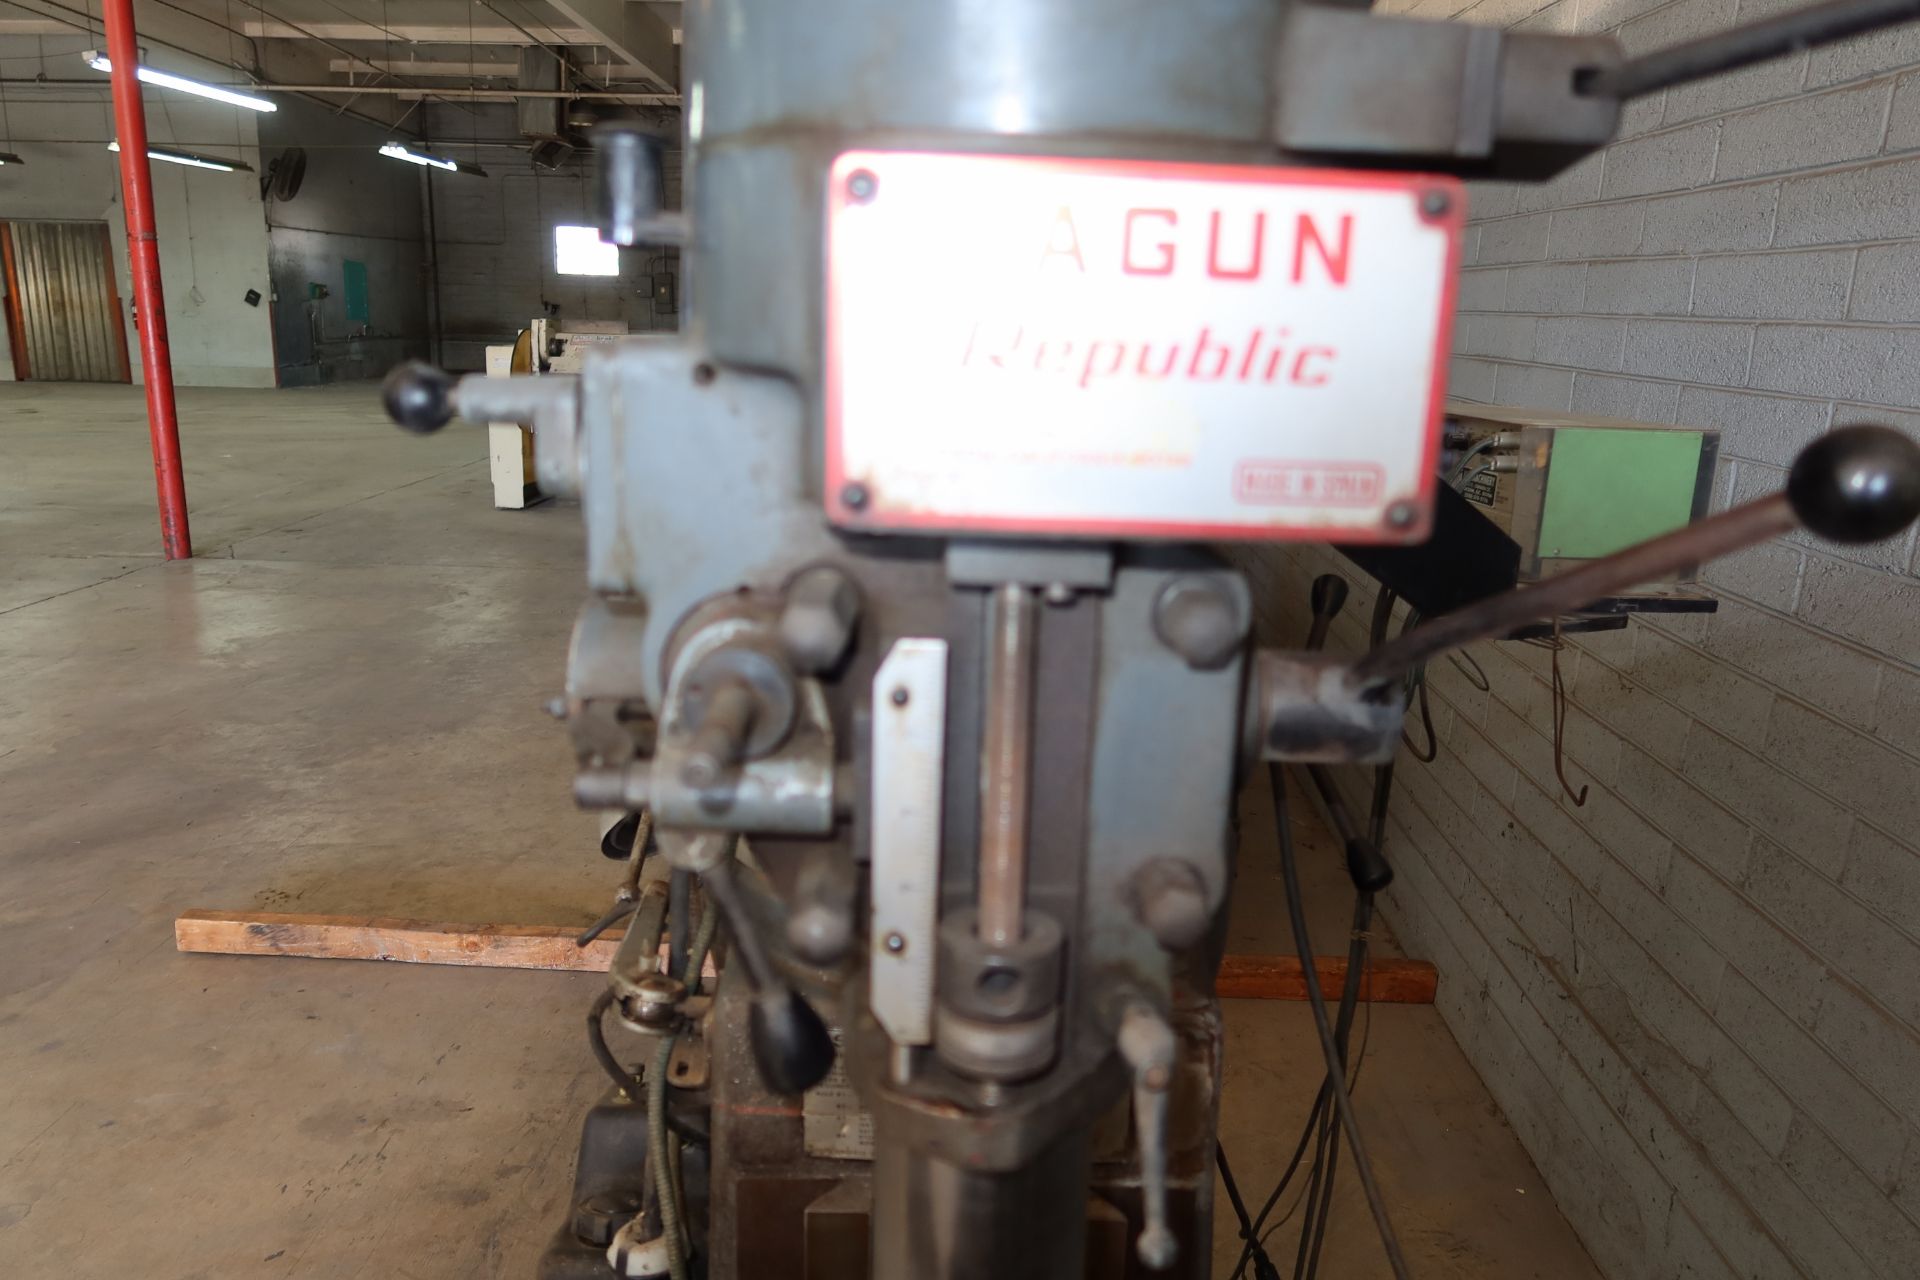 LAGUN VERTICAL MILL, POWER TABLE & KNEE, 50" X 10" TABLE, 2-AXIS DRO & MILL VISE, LOCATED: 3845 N. - Image 2 of 6